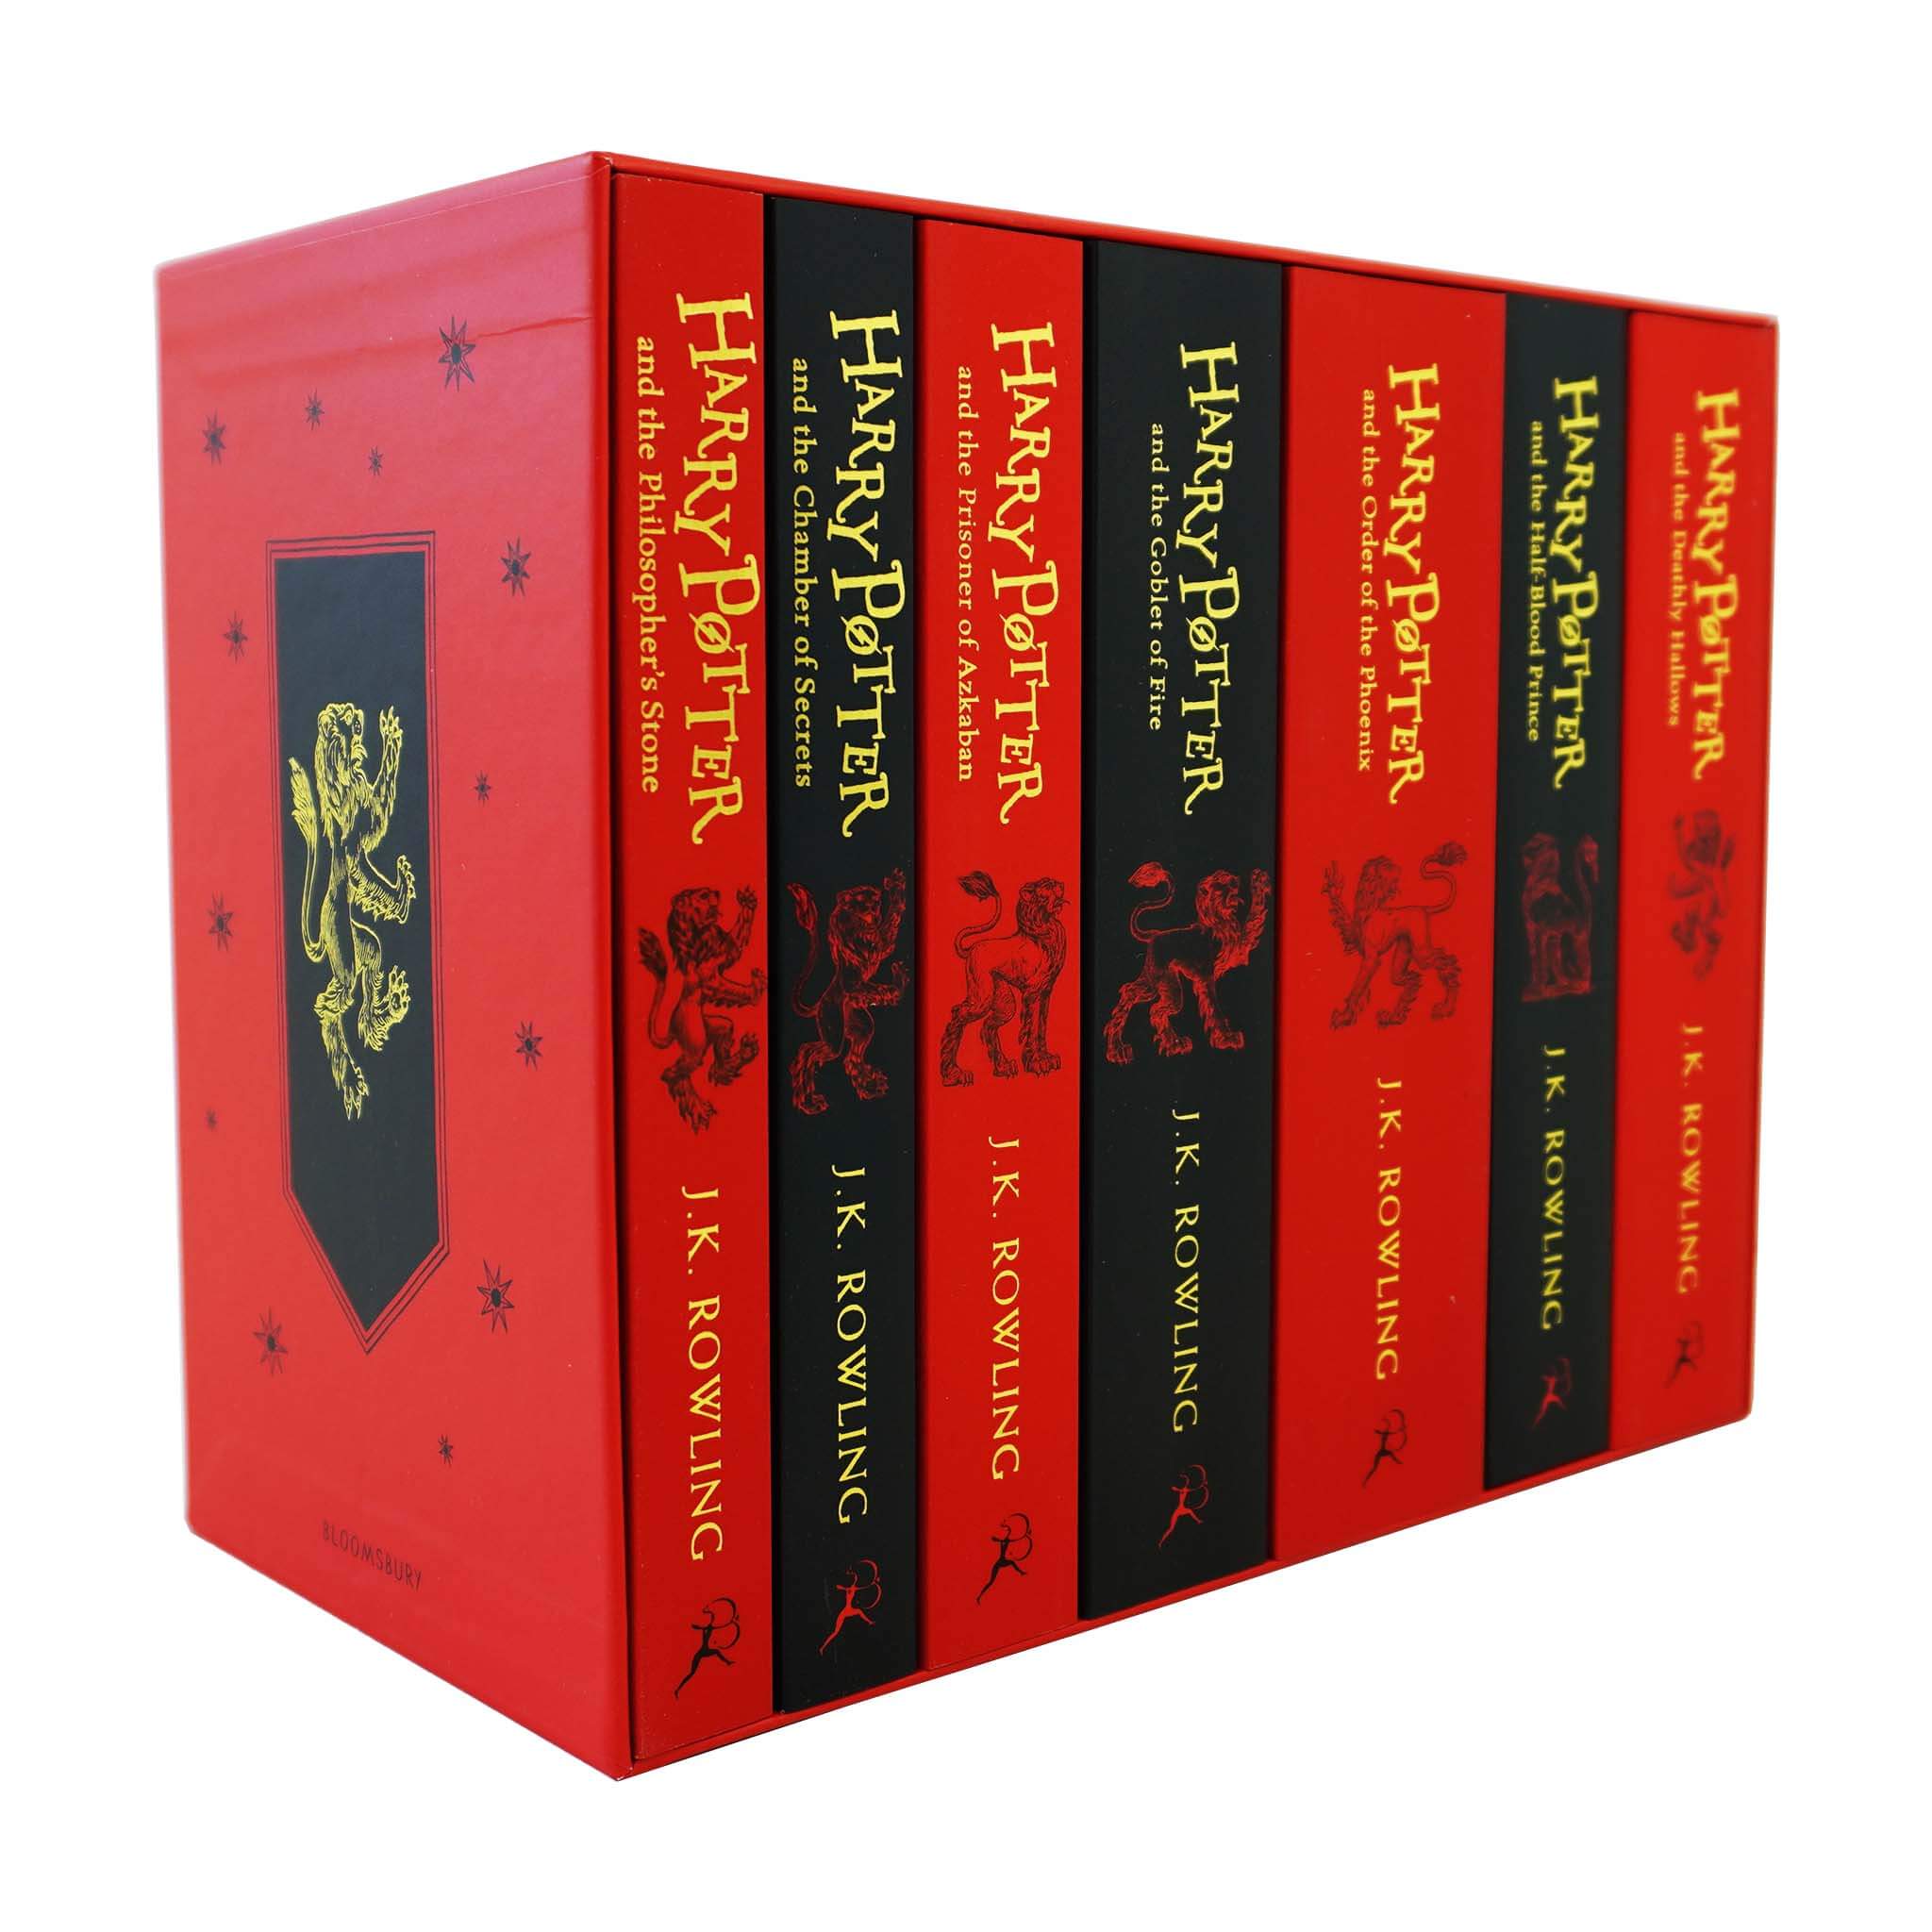 Harry Potter House Slytherin Edition Series Collection 7 Books Set By J.K.  Rowling